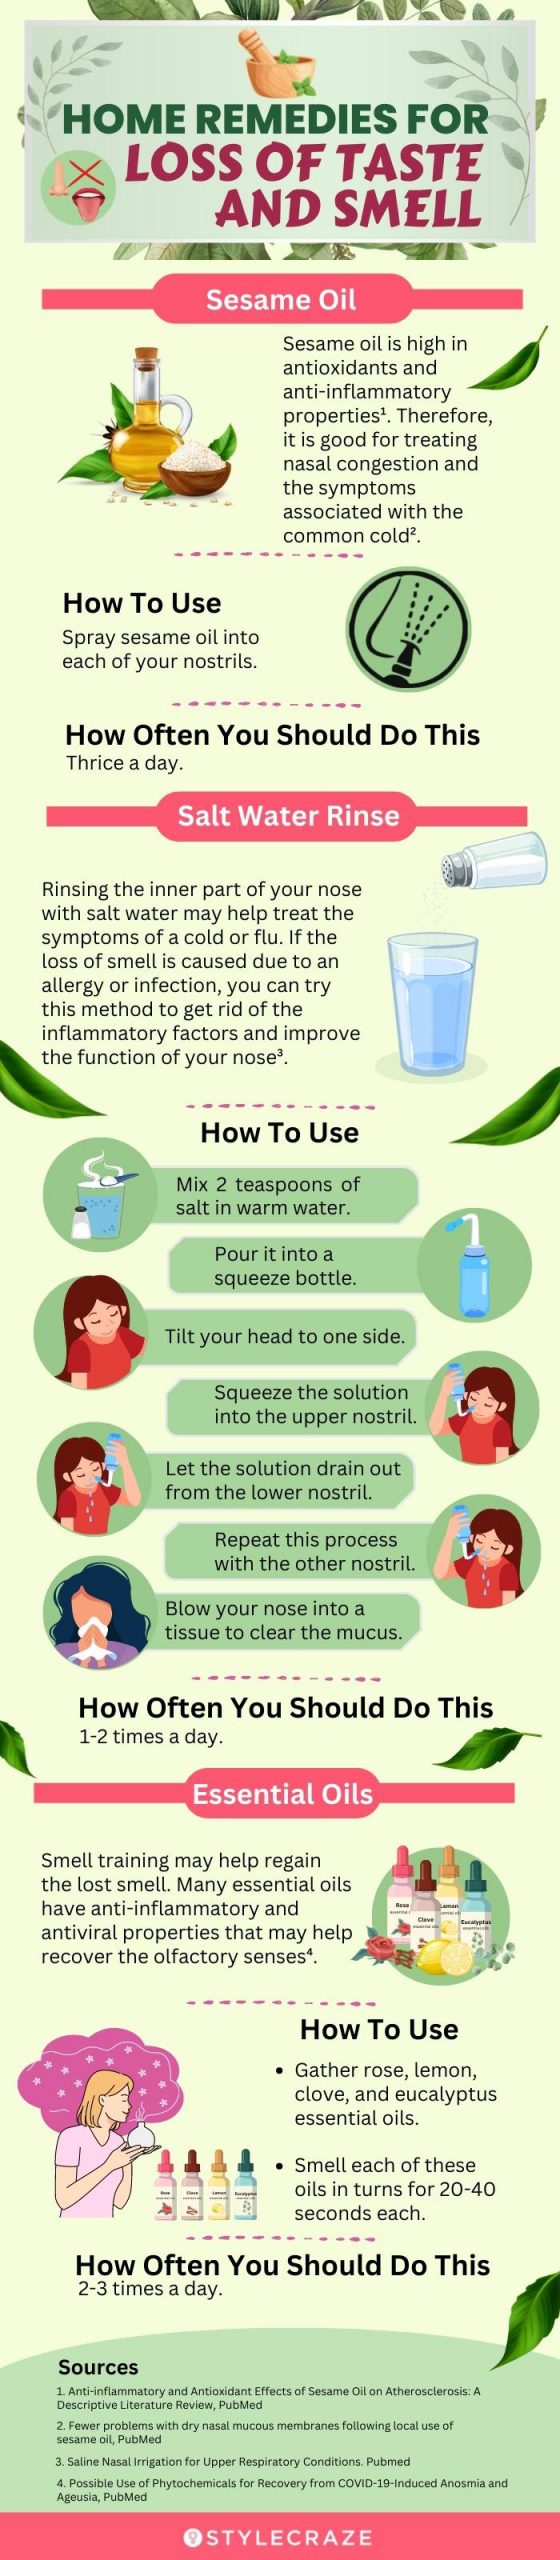 home remedies for loss of taste and smell (infographic)